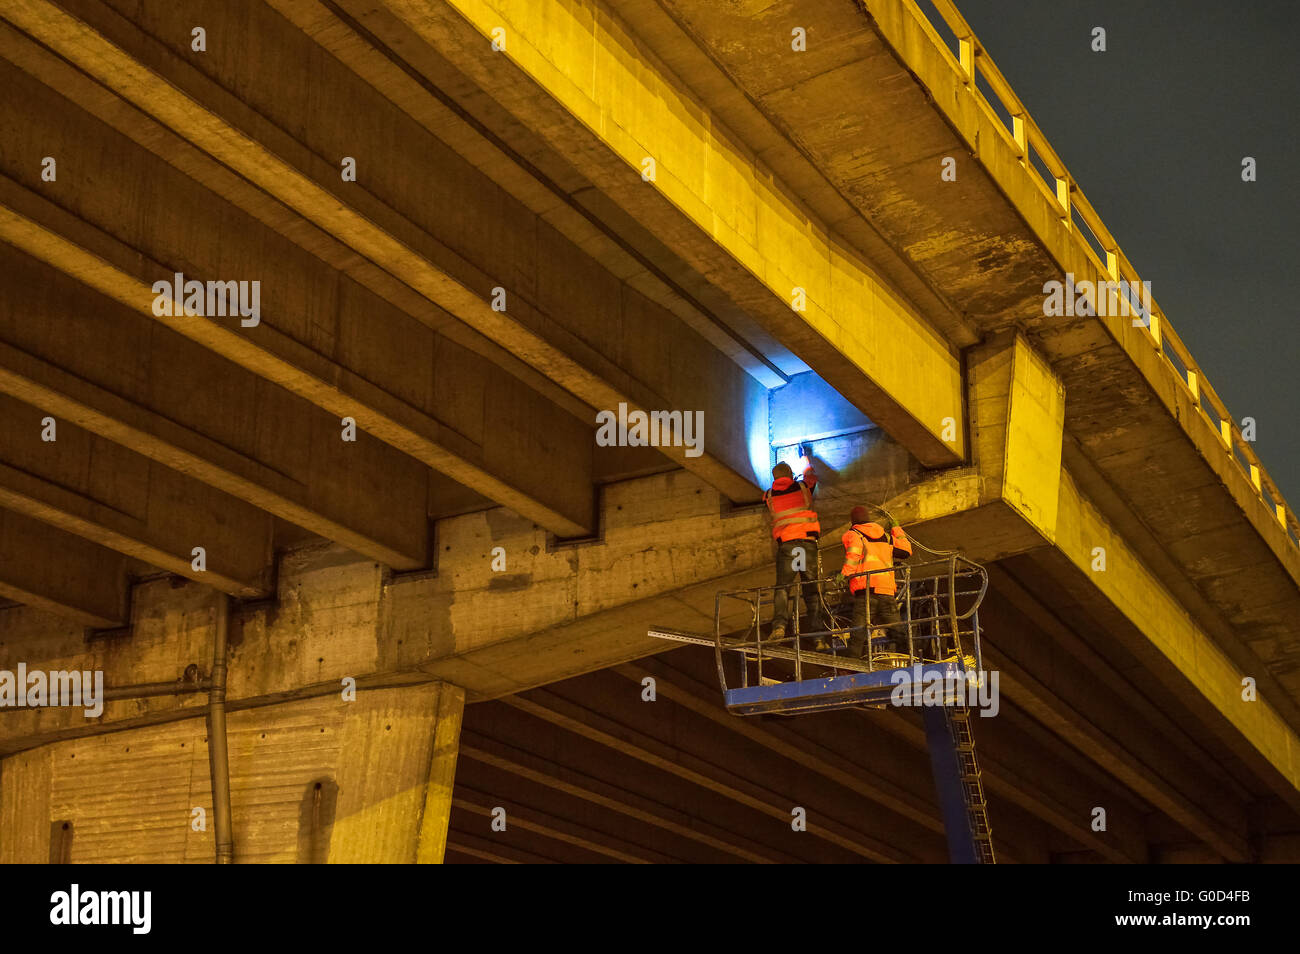 Workers inspect a bridge highway at night Stock Photo